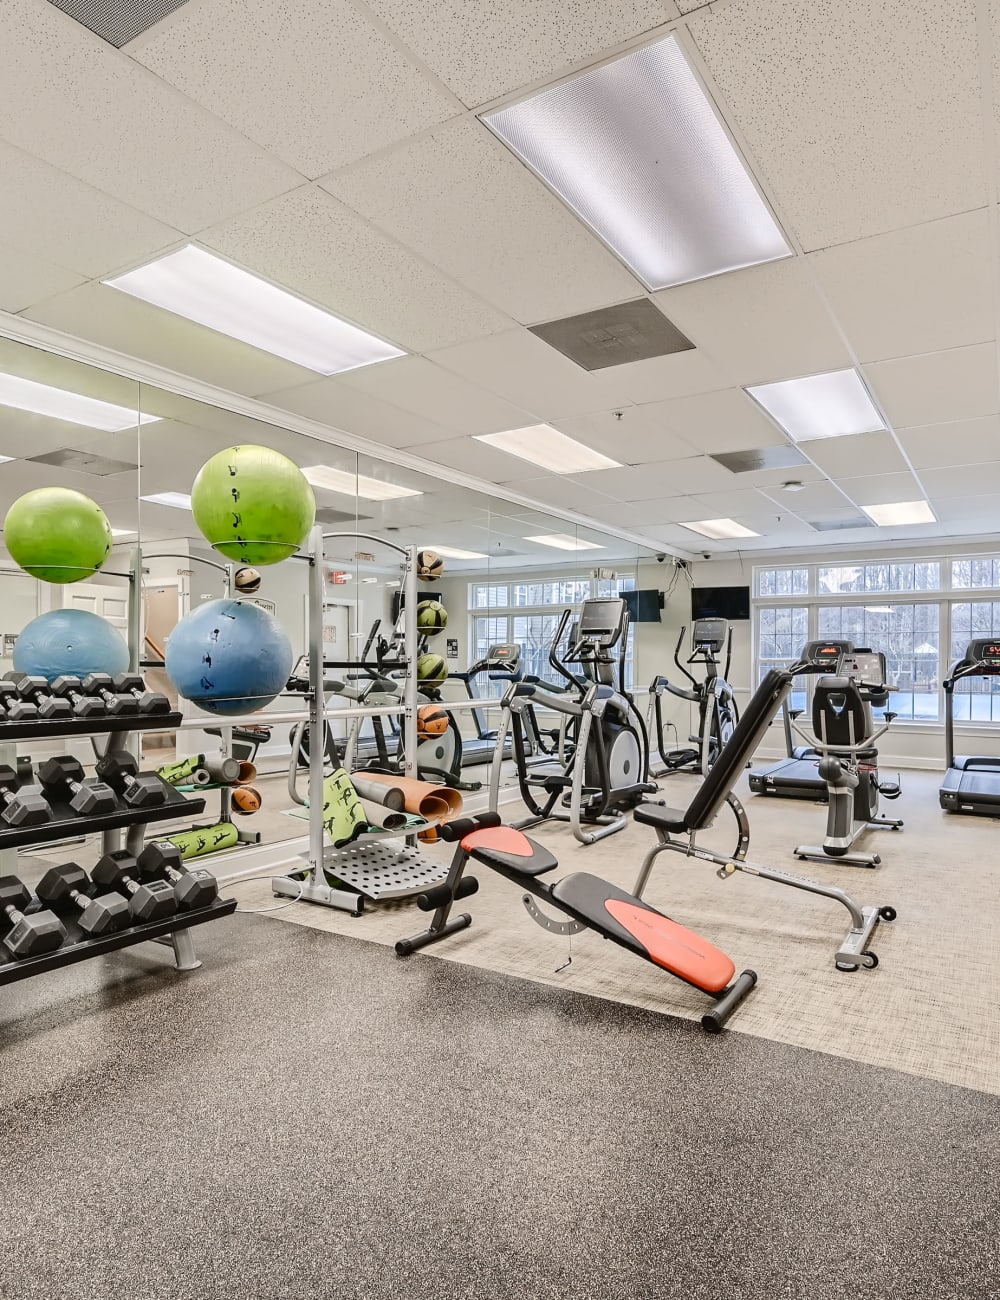 Equipment in the fitness center at Park at Kingsview Village in Germantown, Maryland